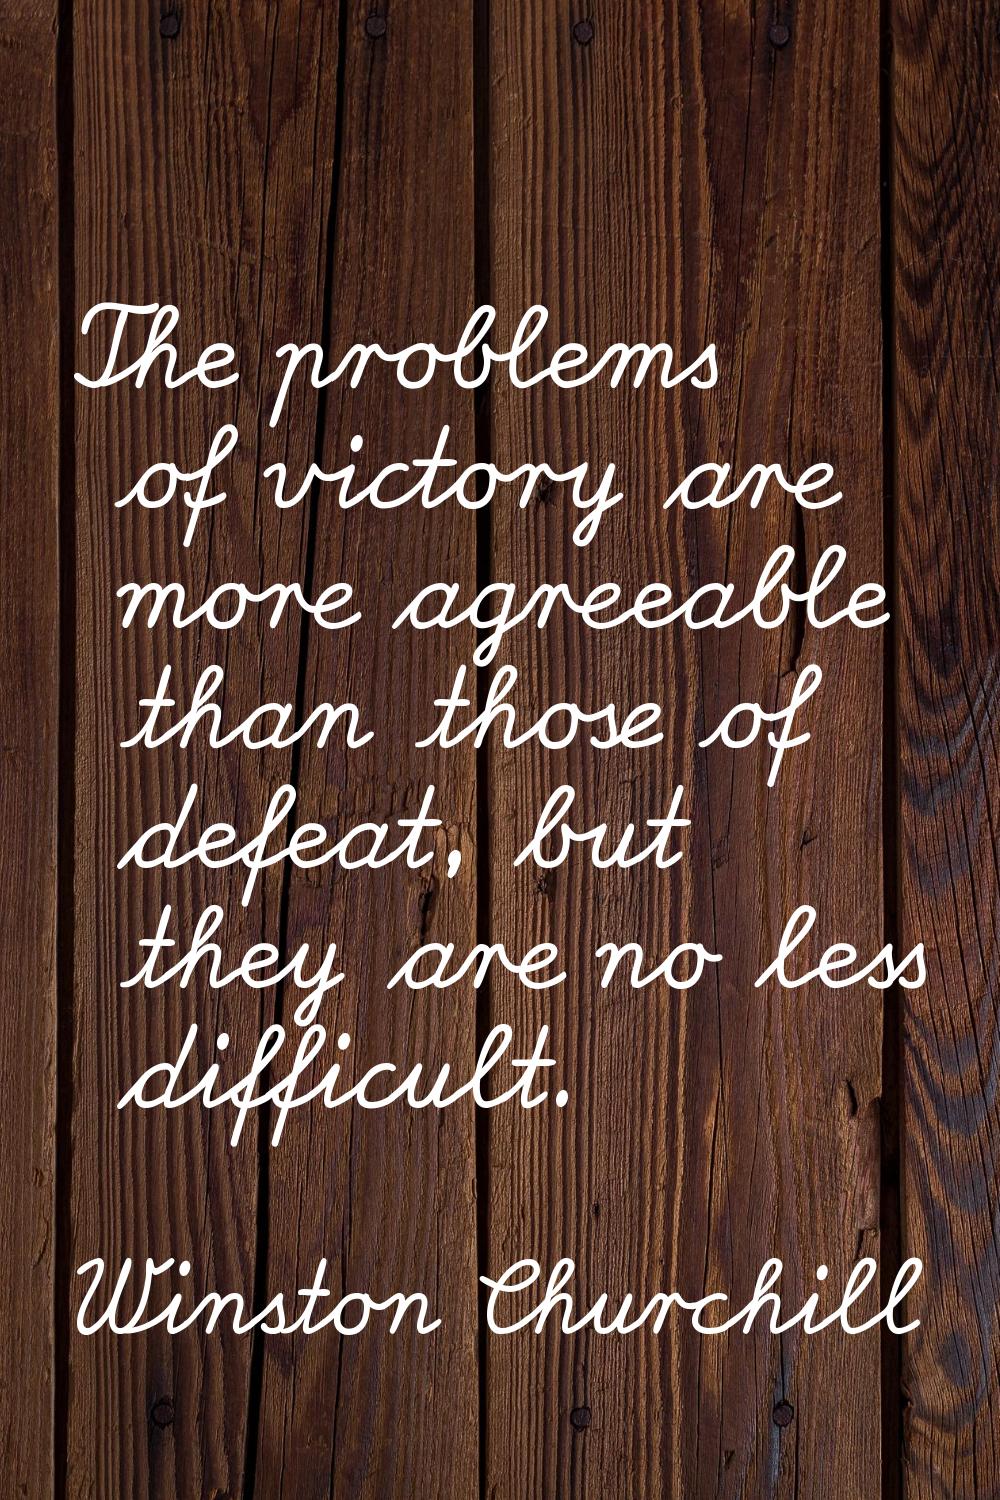 The problems of victory are more agreeable than those of defeat, but they are no less difficult.